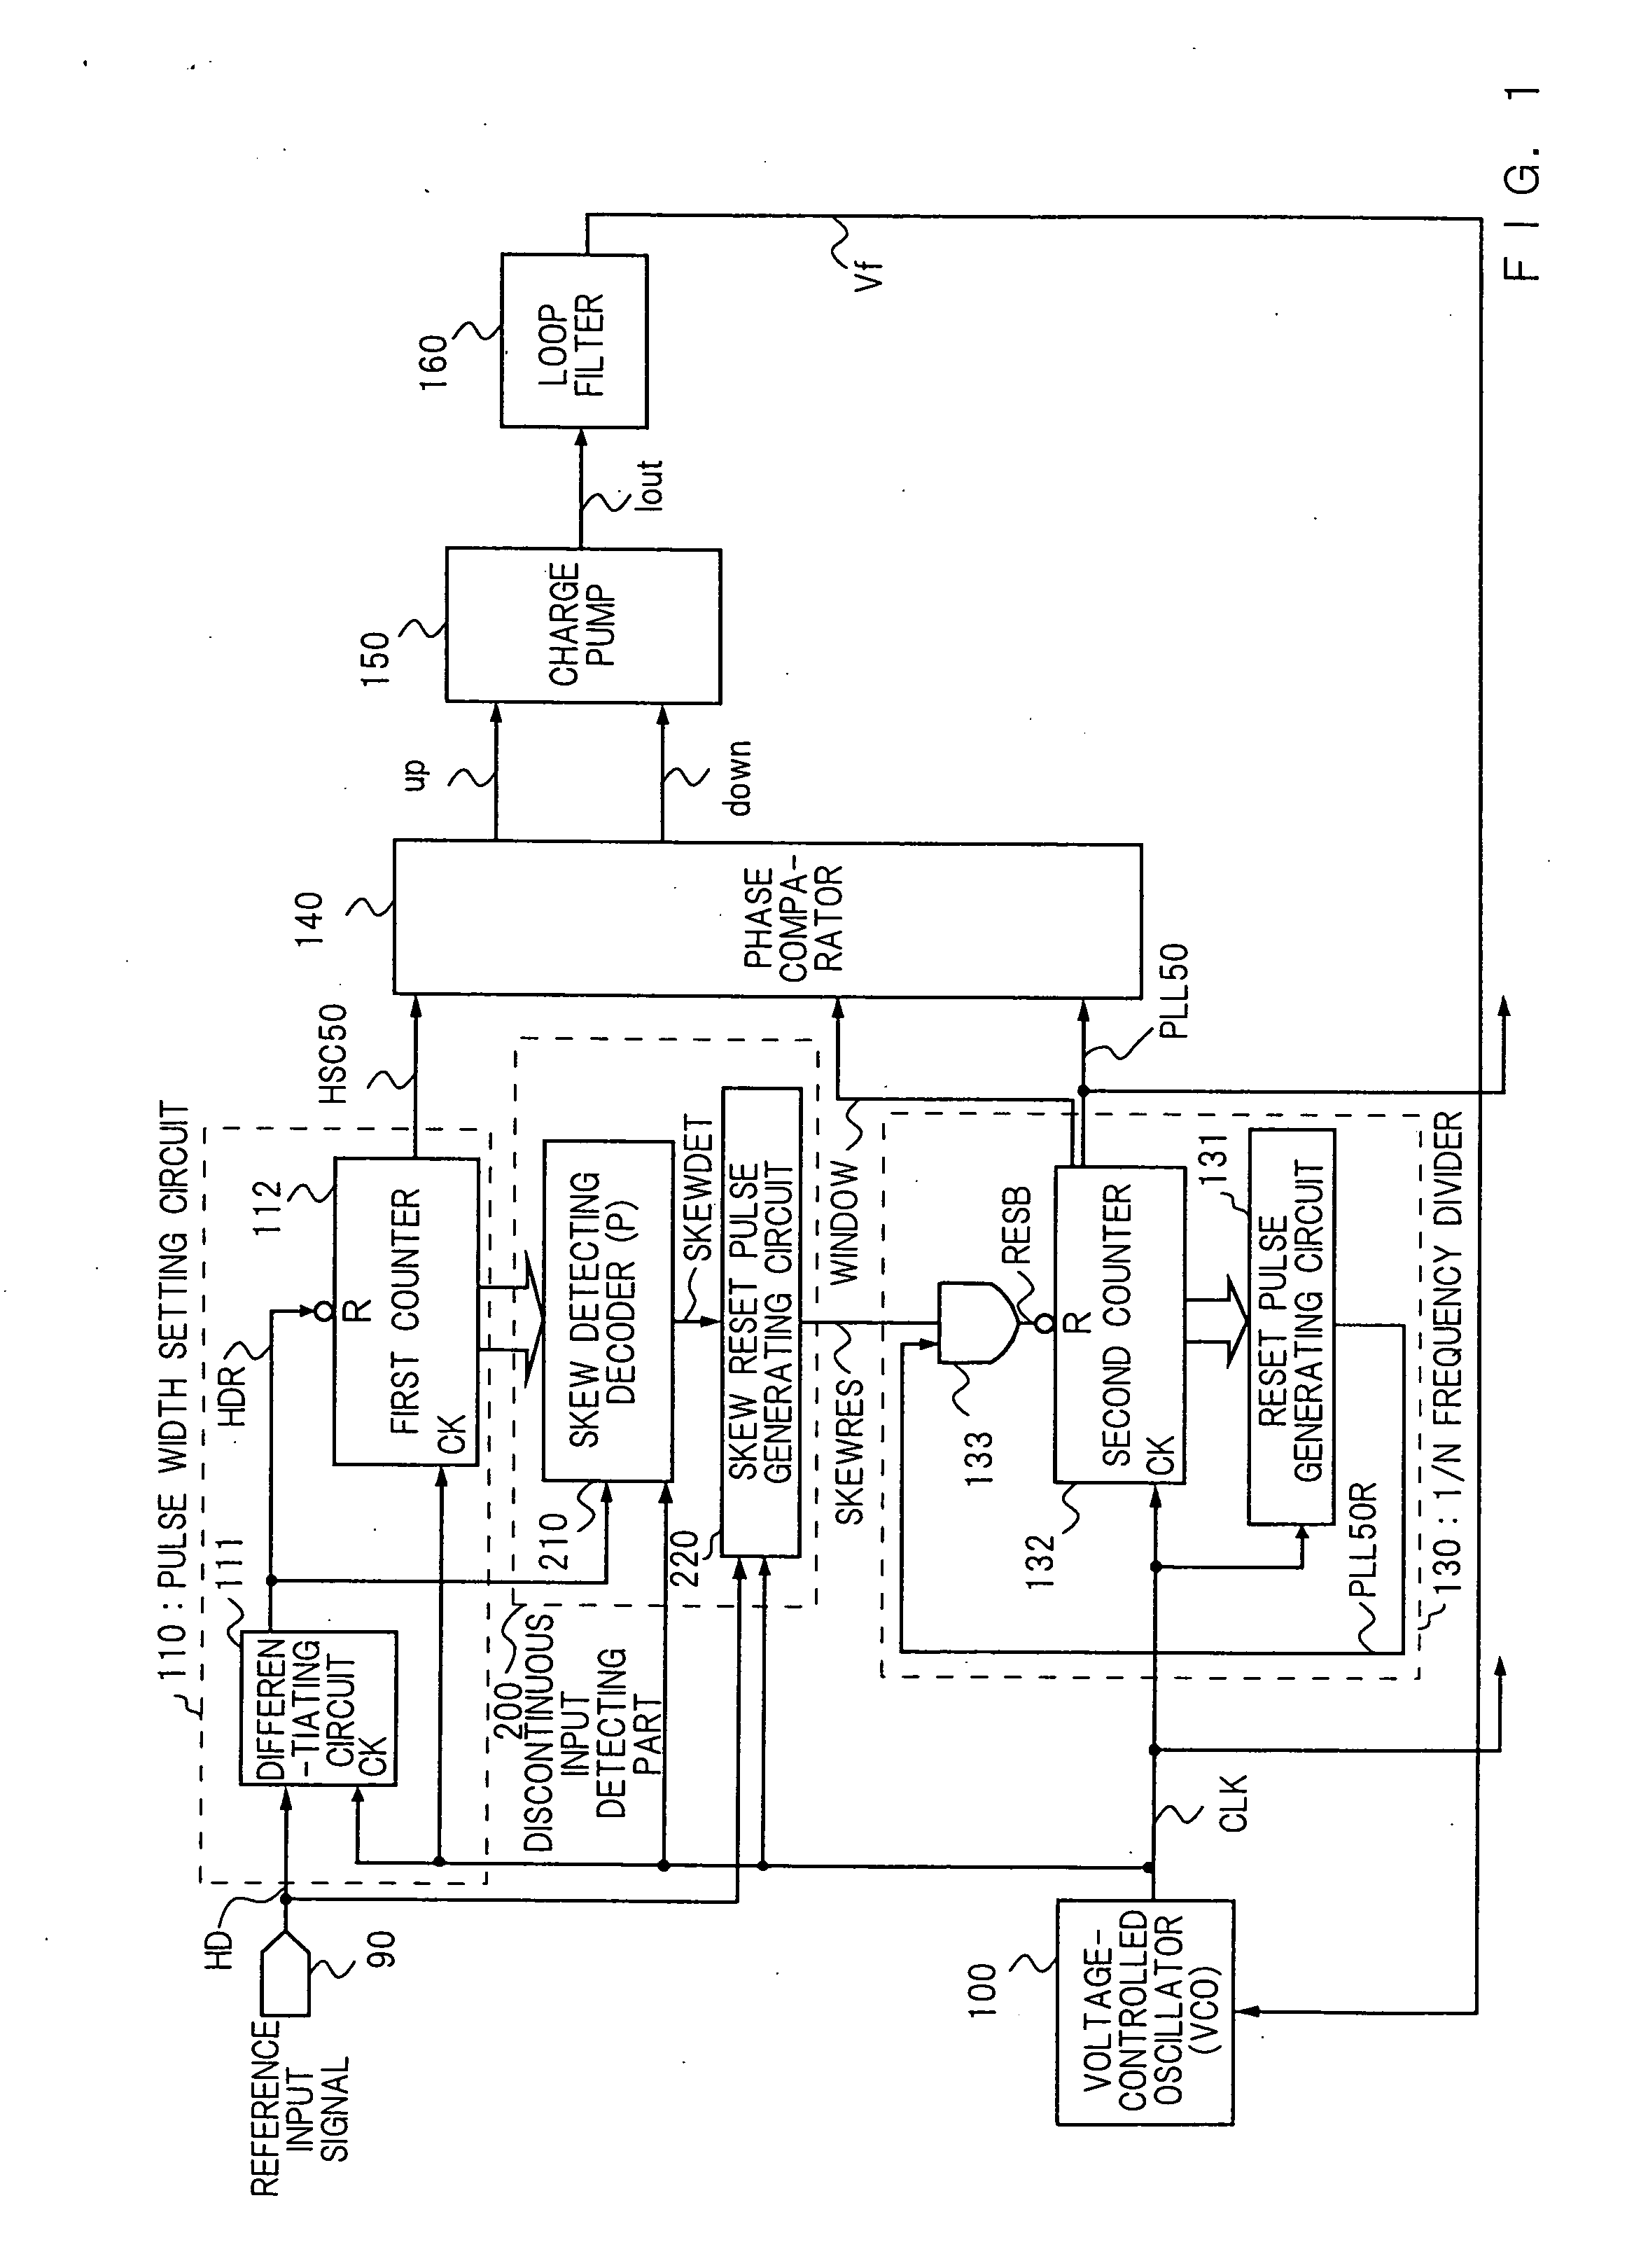 PLL circuit and image display device